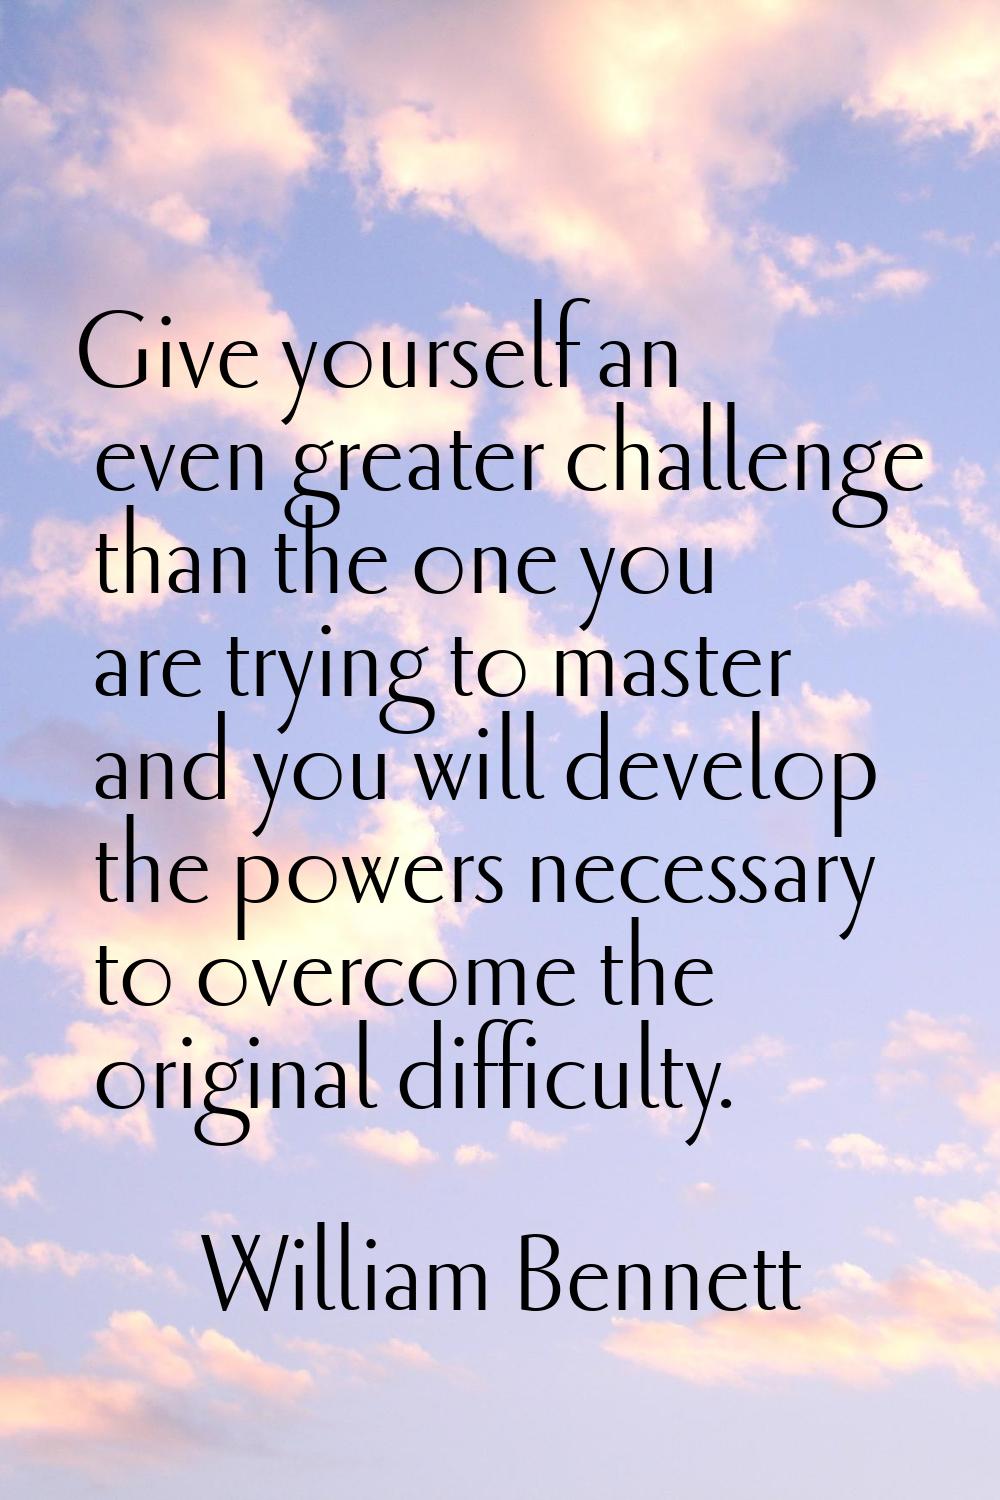 Give yourself an even greater challenge than the one you are trying to master and you will develop 